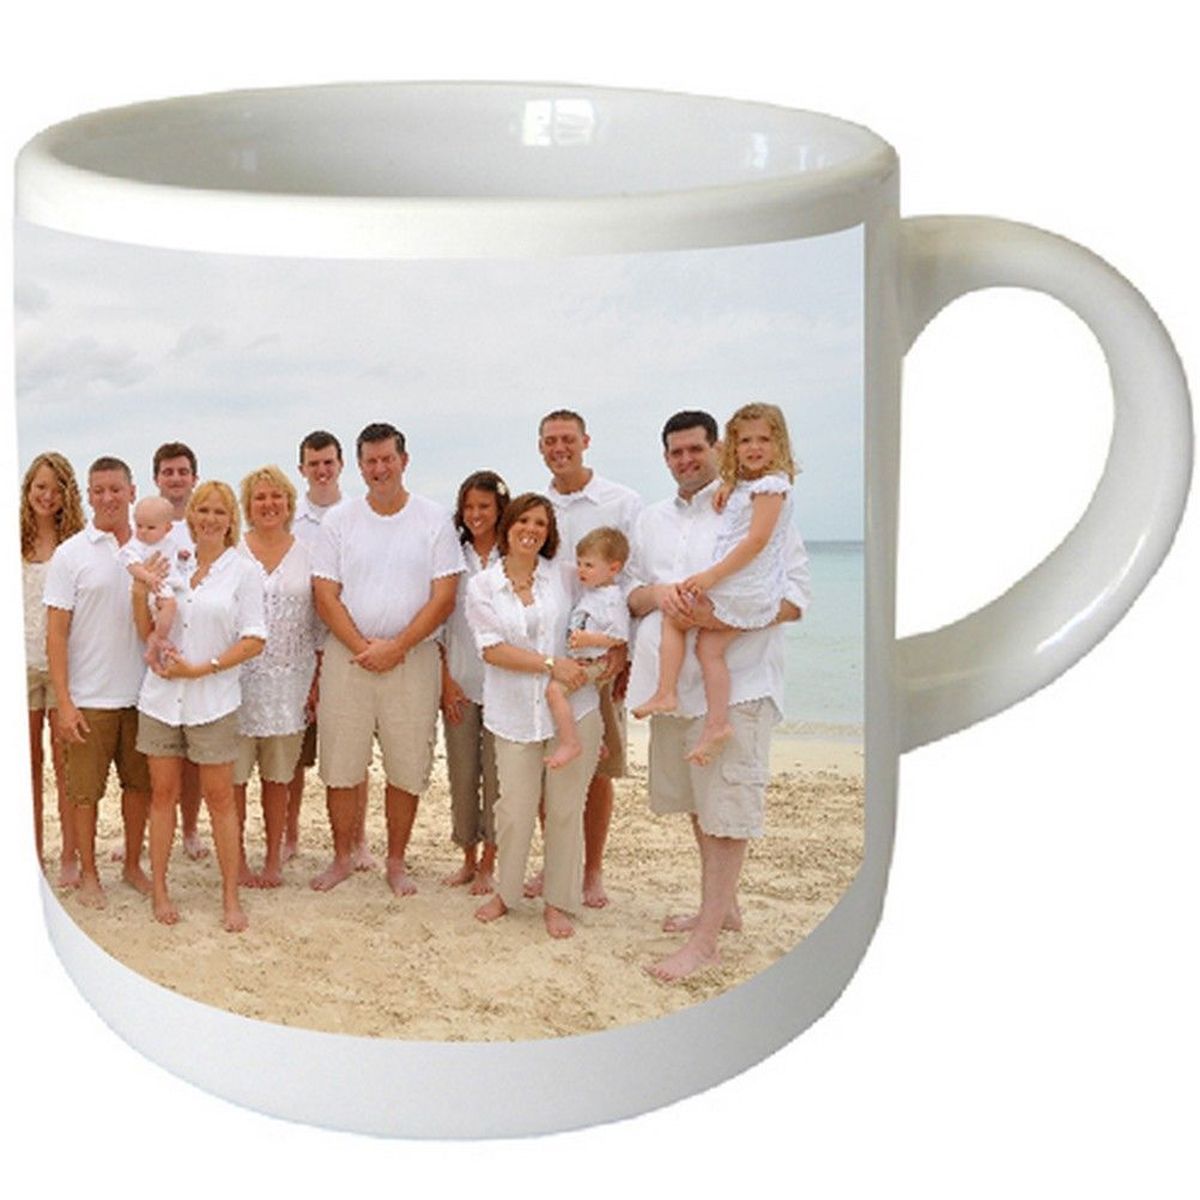 Small simple mug with PERSONALIZED PICTURE